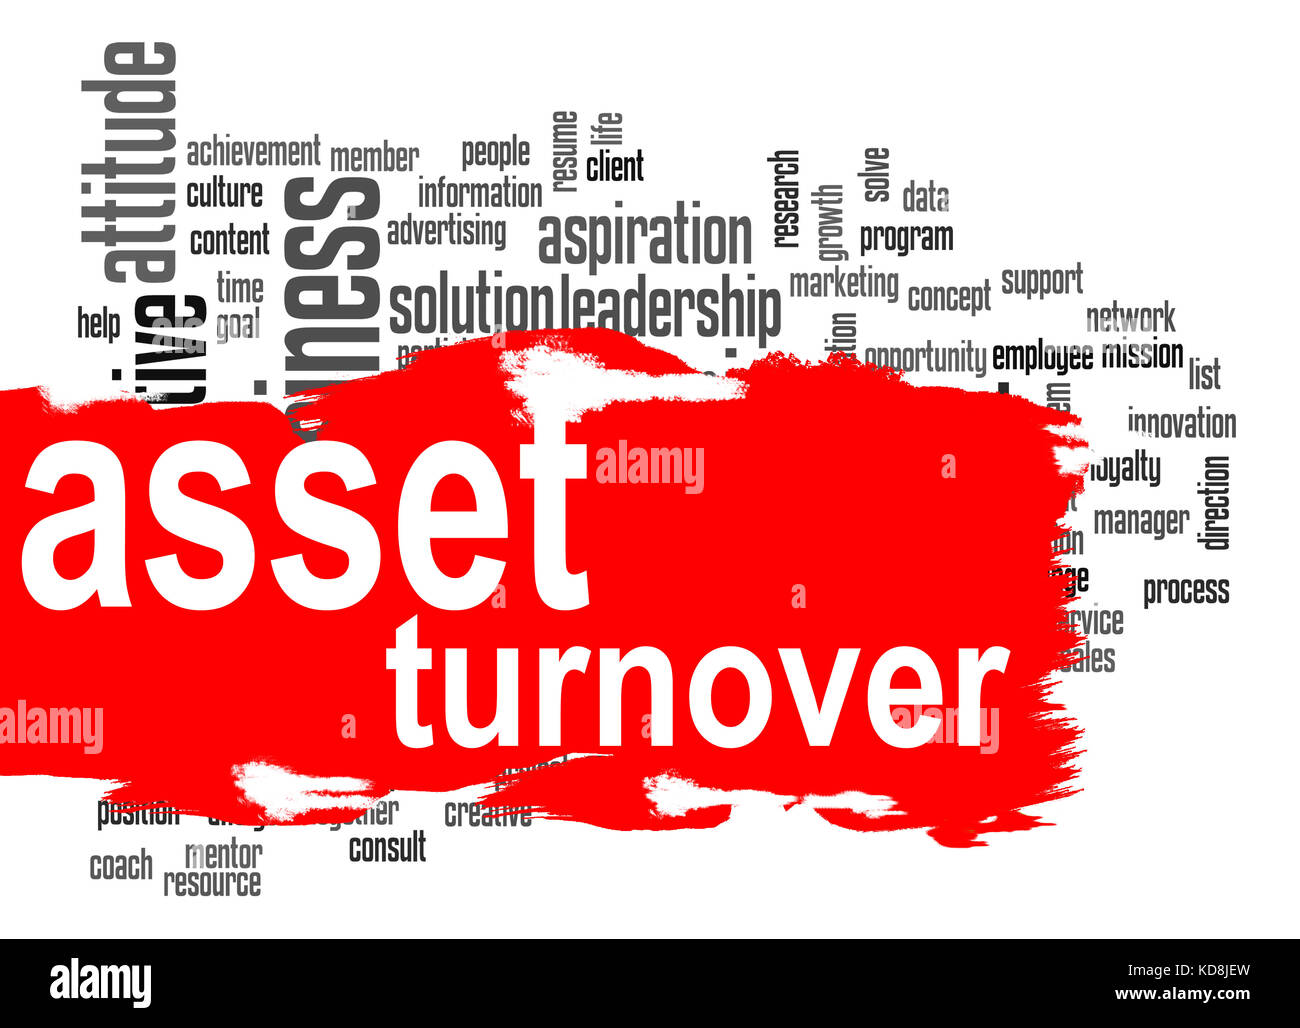 Asset turnover word cloud with red banner image with hi-res rendered artwork that could be used for any graphic design. Stock Photo